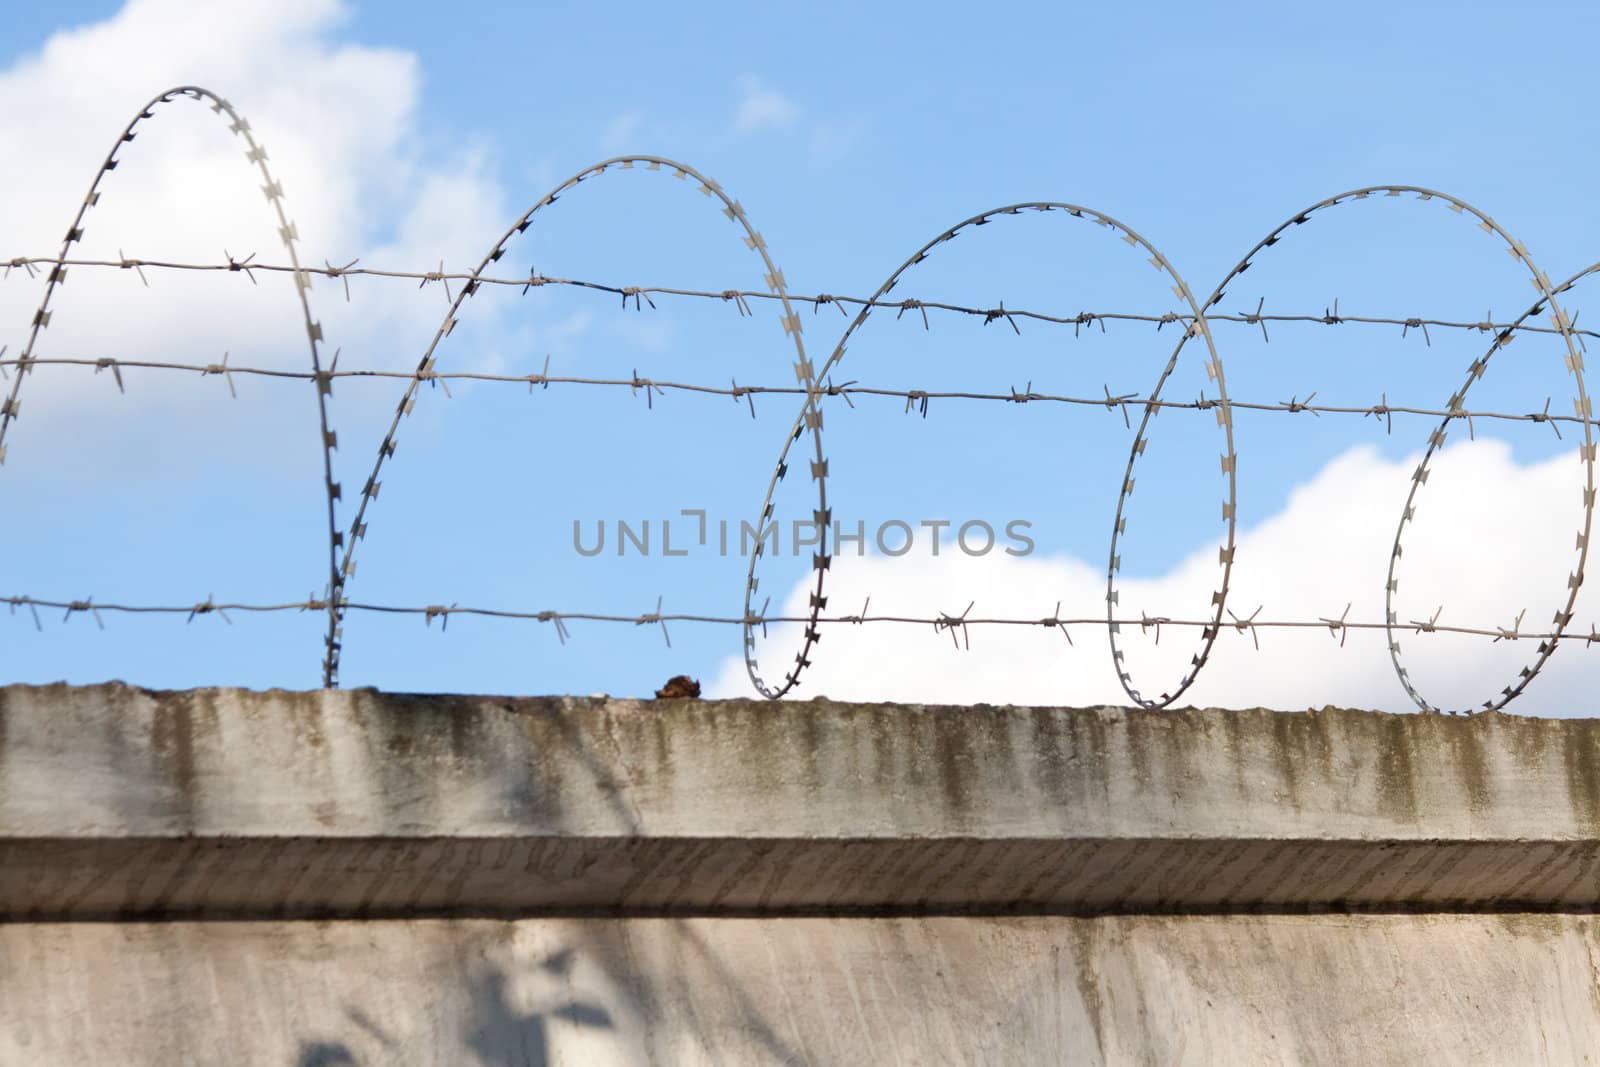 Wall with barbed wire on a background of blue sky